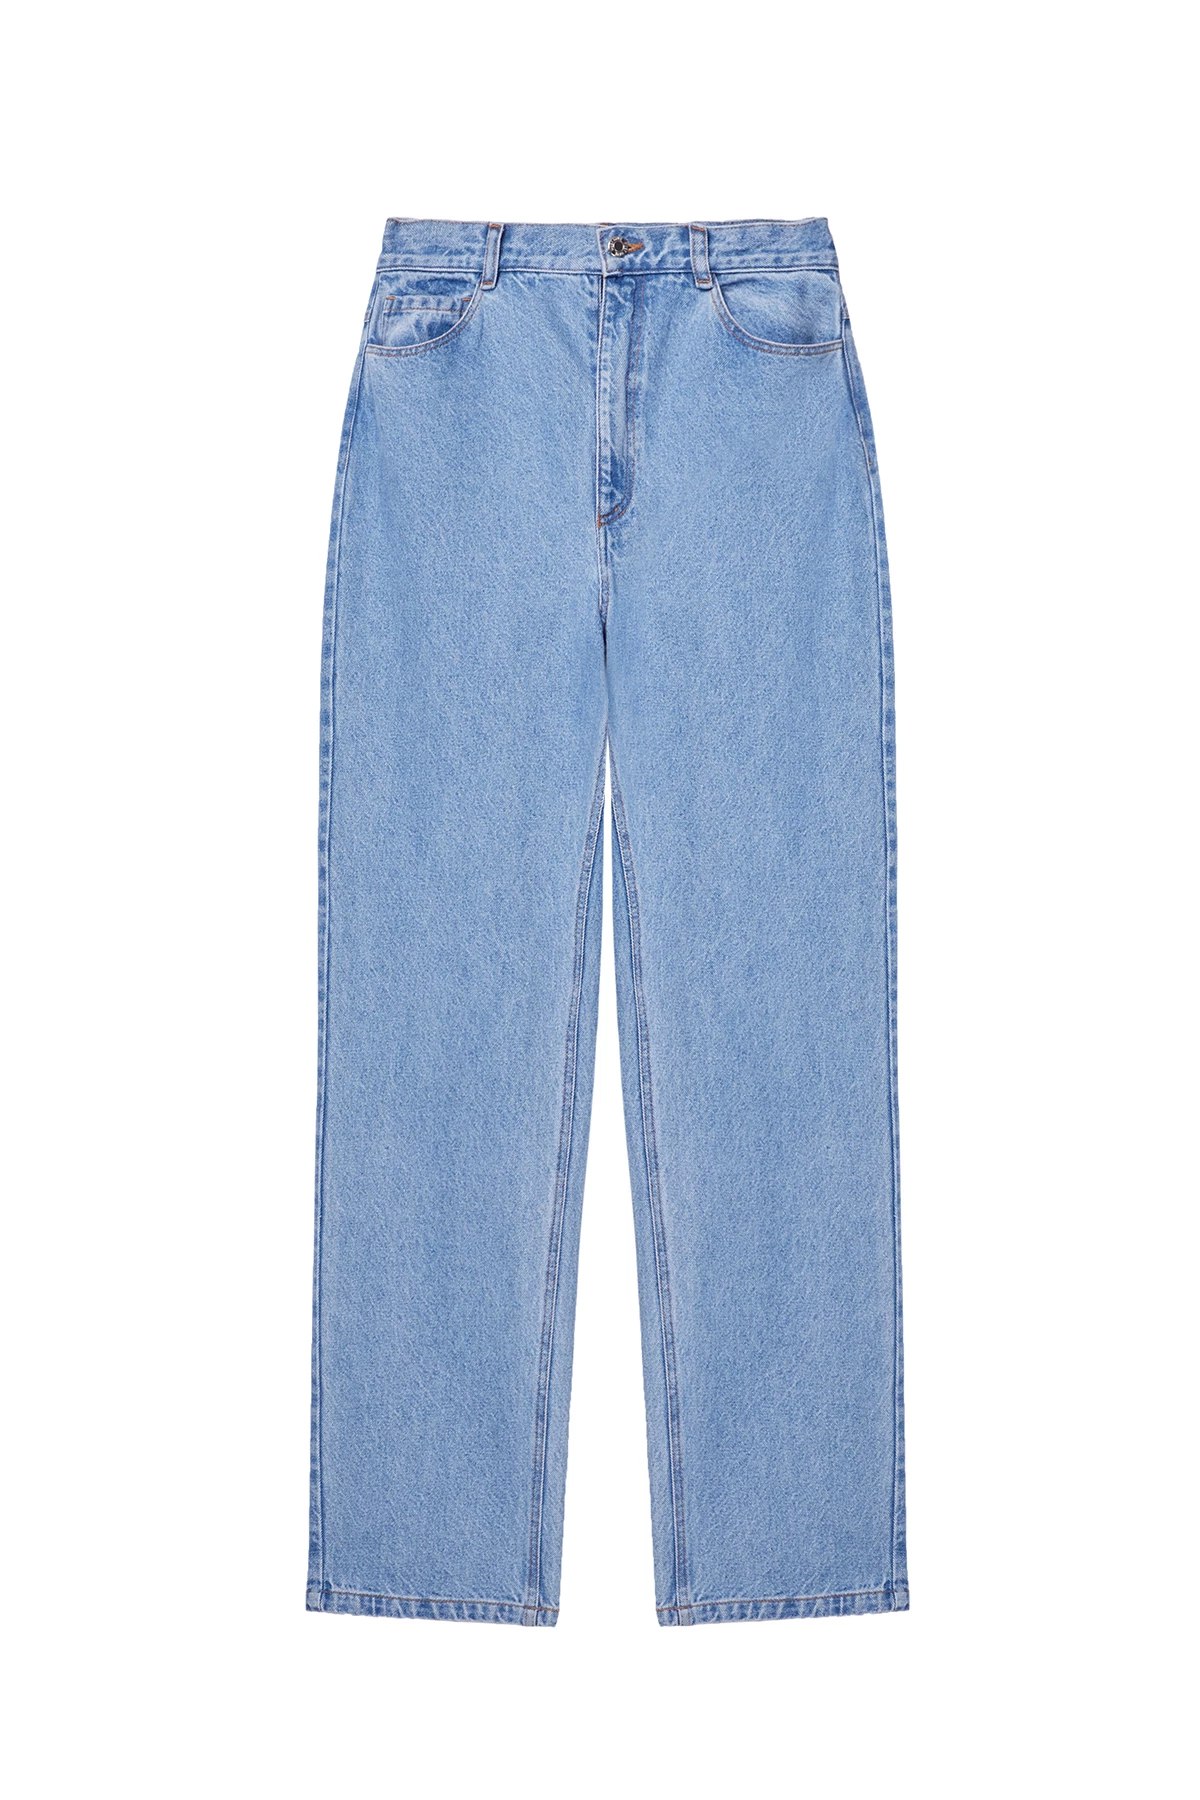 Blue elongated baggy jeans made of 100% cotton, photo 6